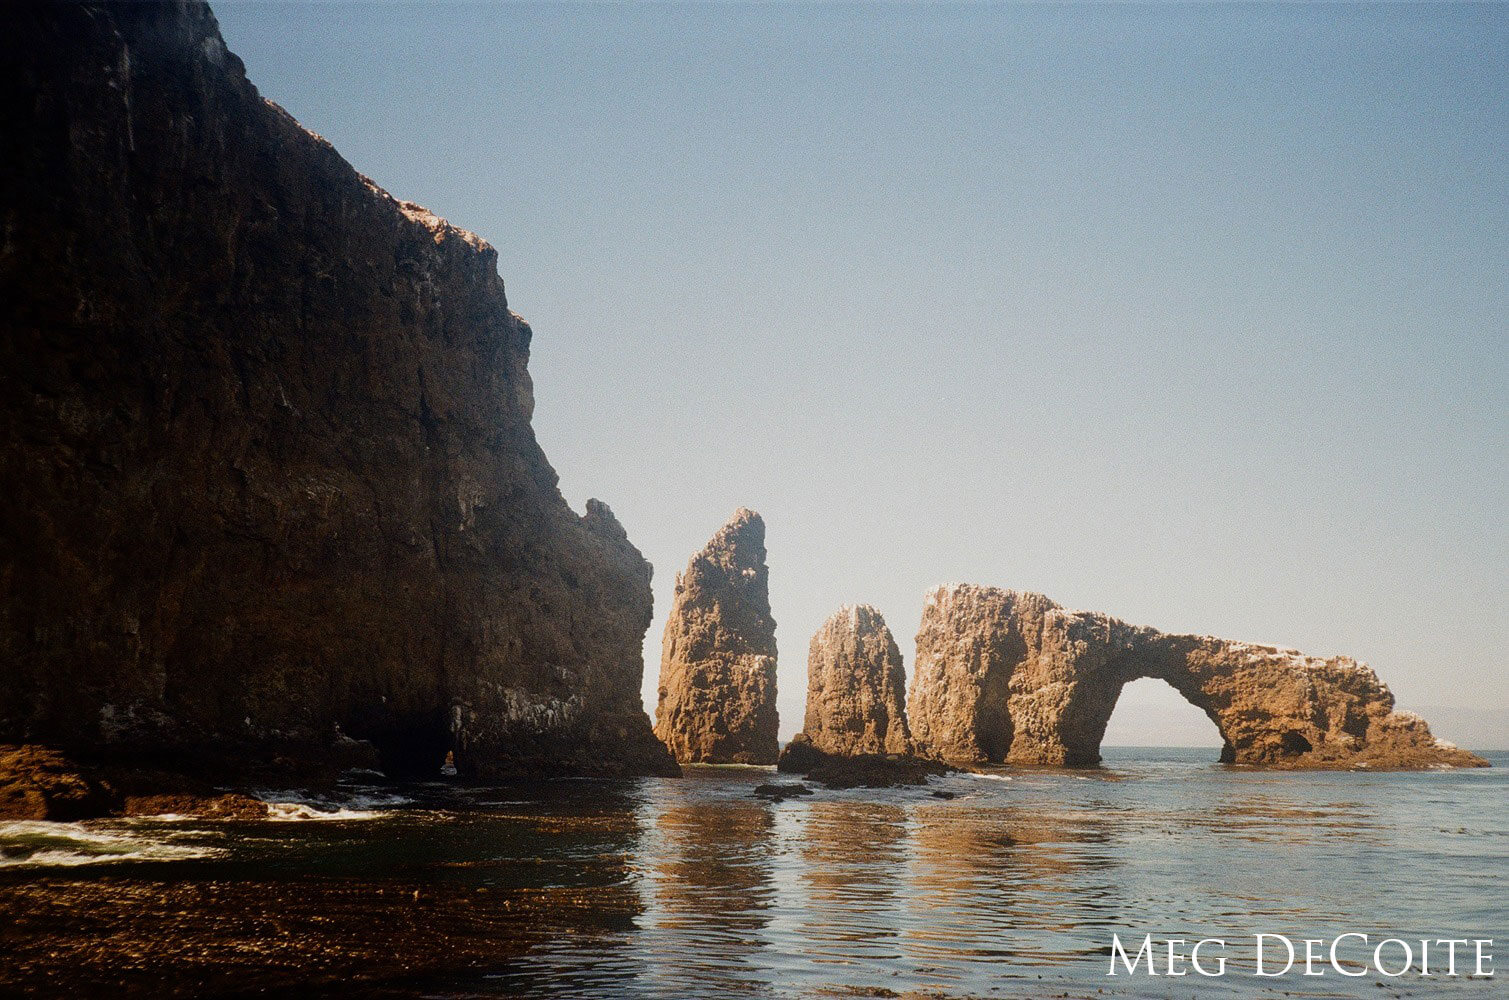 Rock arch in the water.